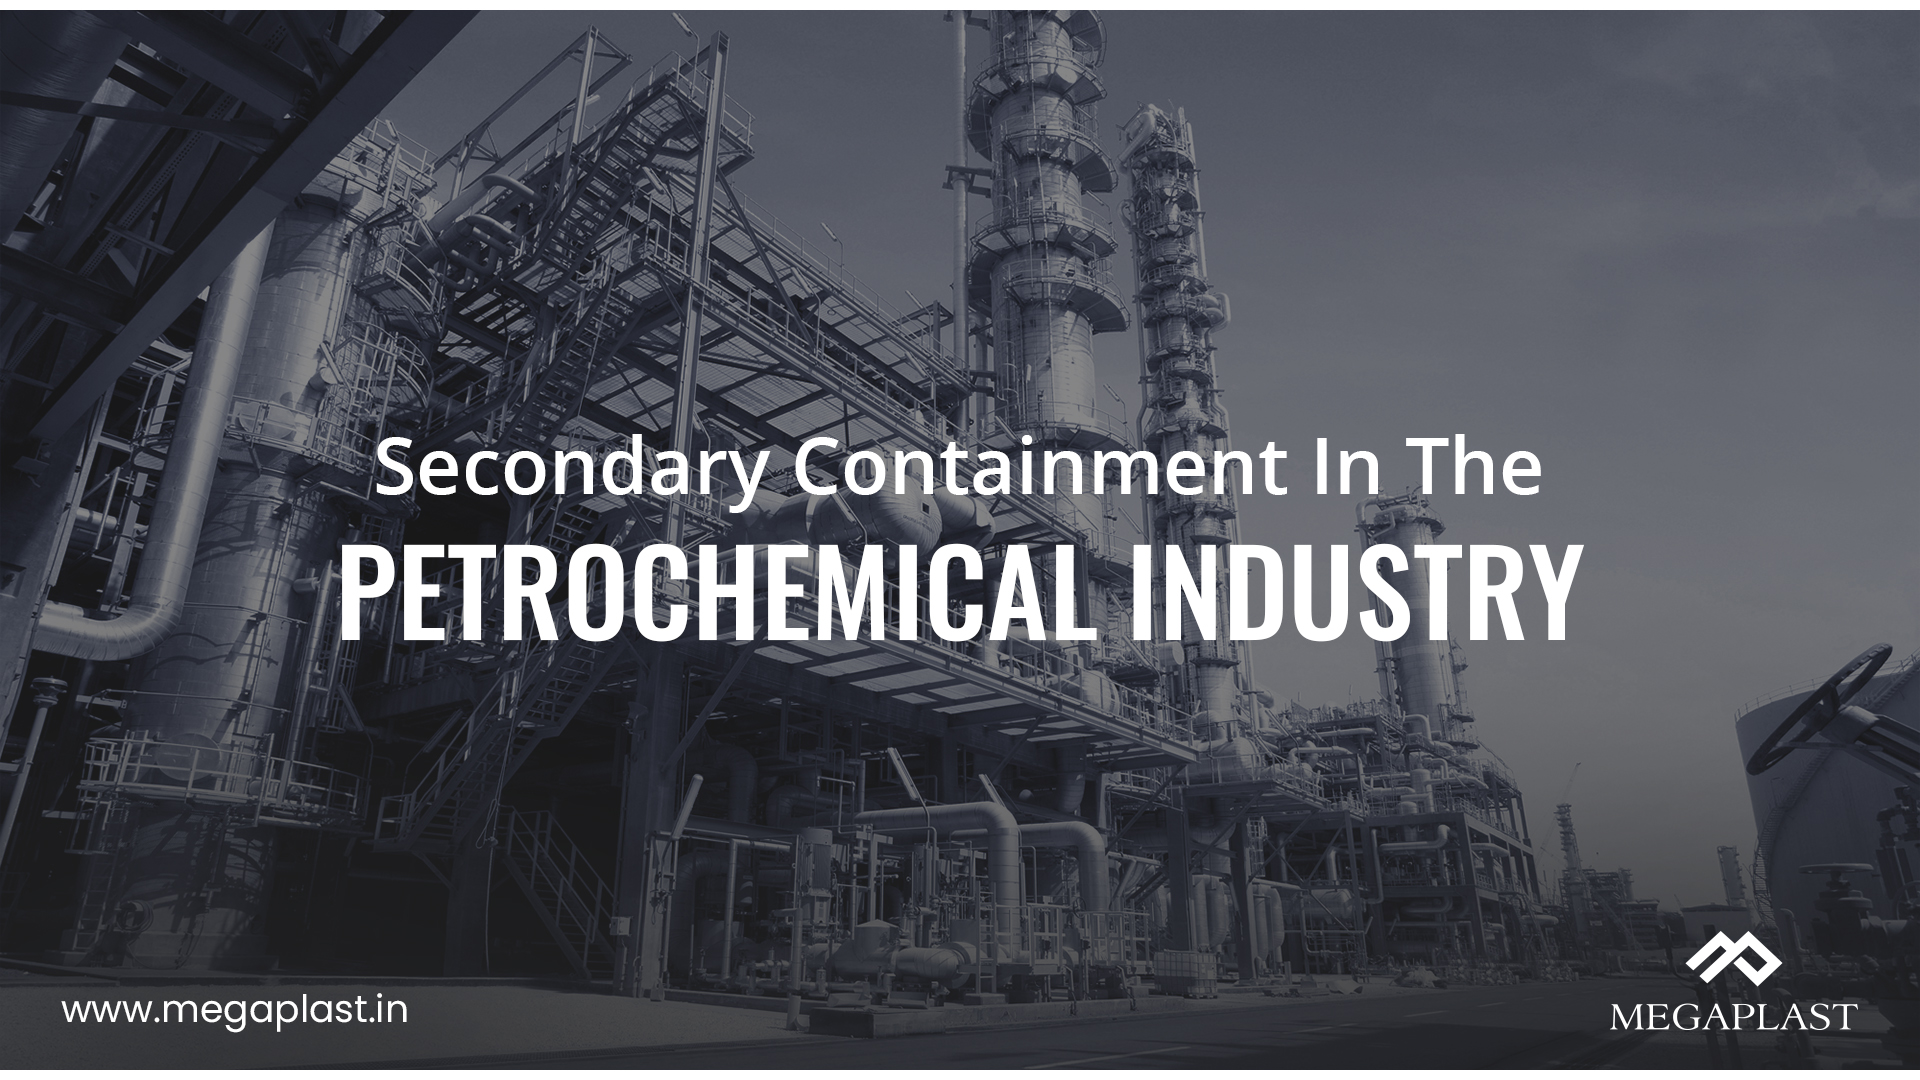 Secondary Containment In The Petrochemical Industry